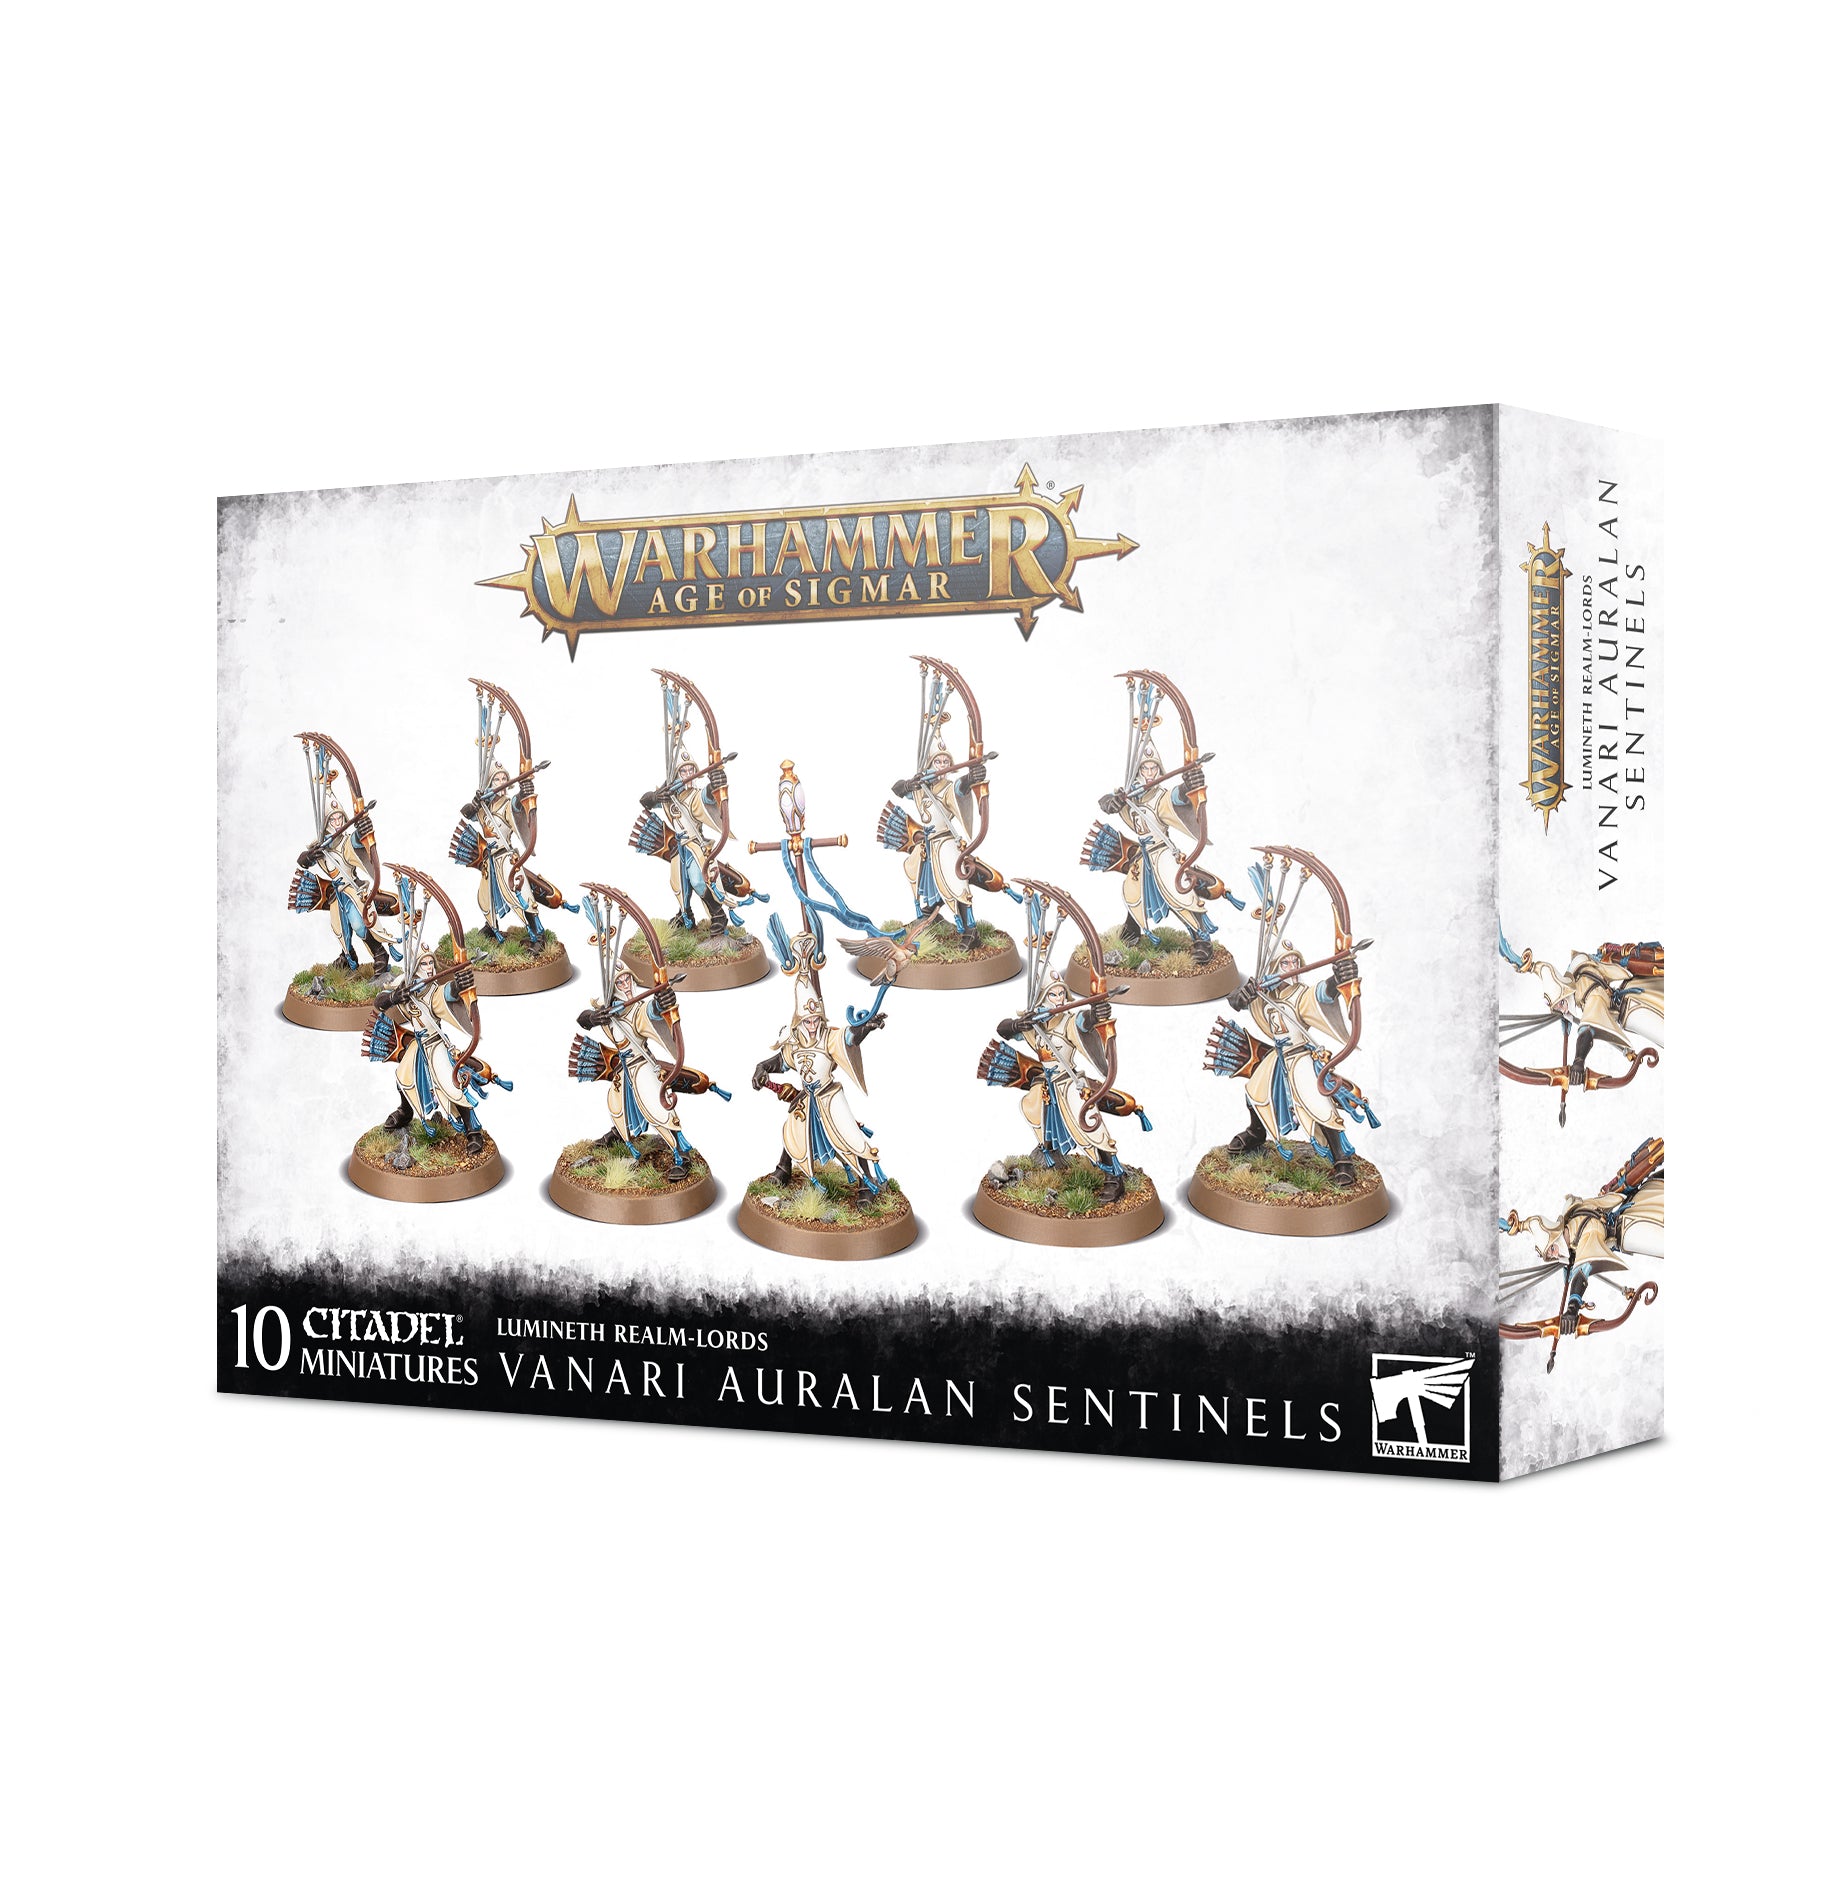 LUMINETH REALM-LORDS: VANARI AURALAN SENTINELS Realm-Lords Games Workshop    | Red Claw Gaming